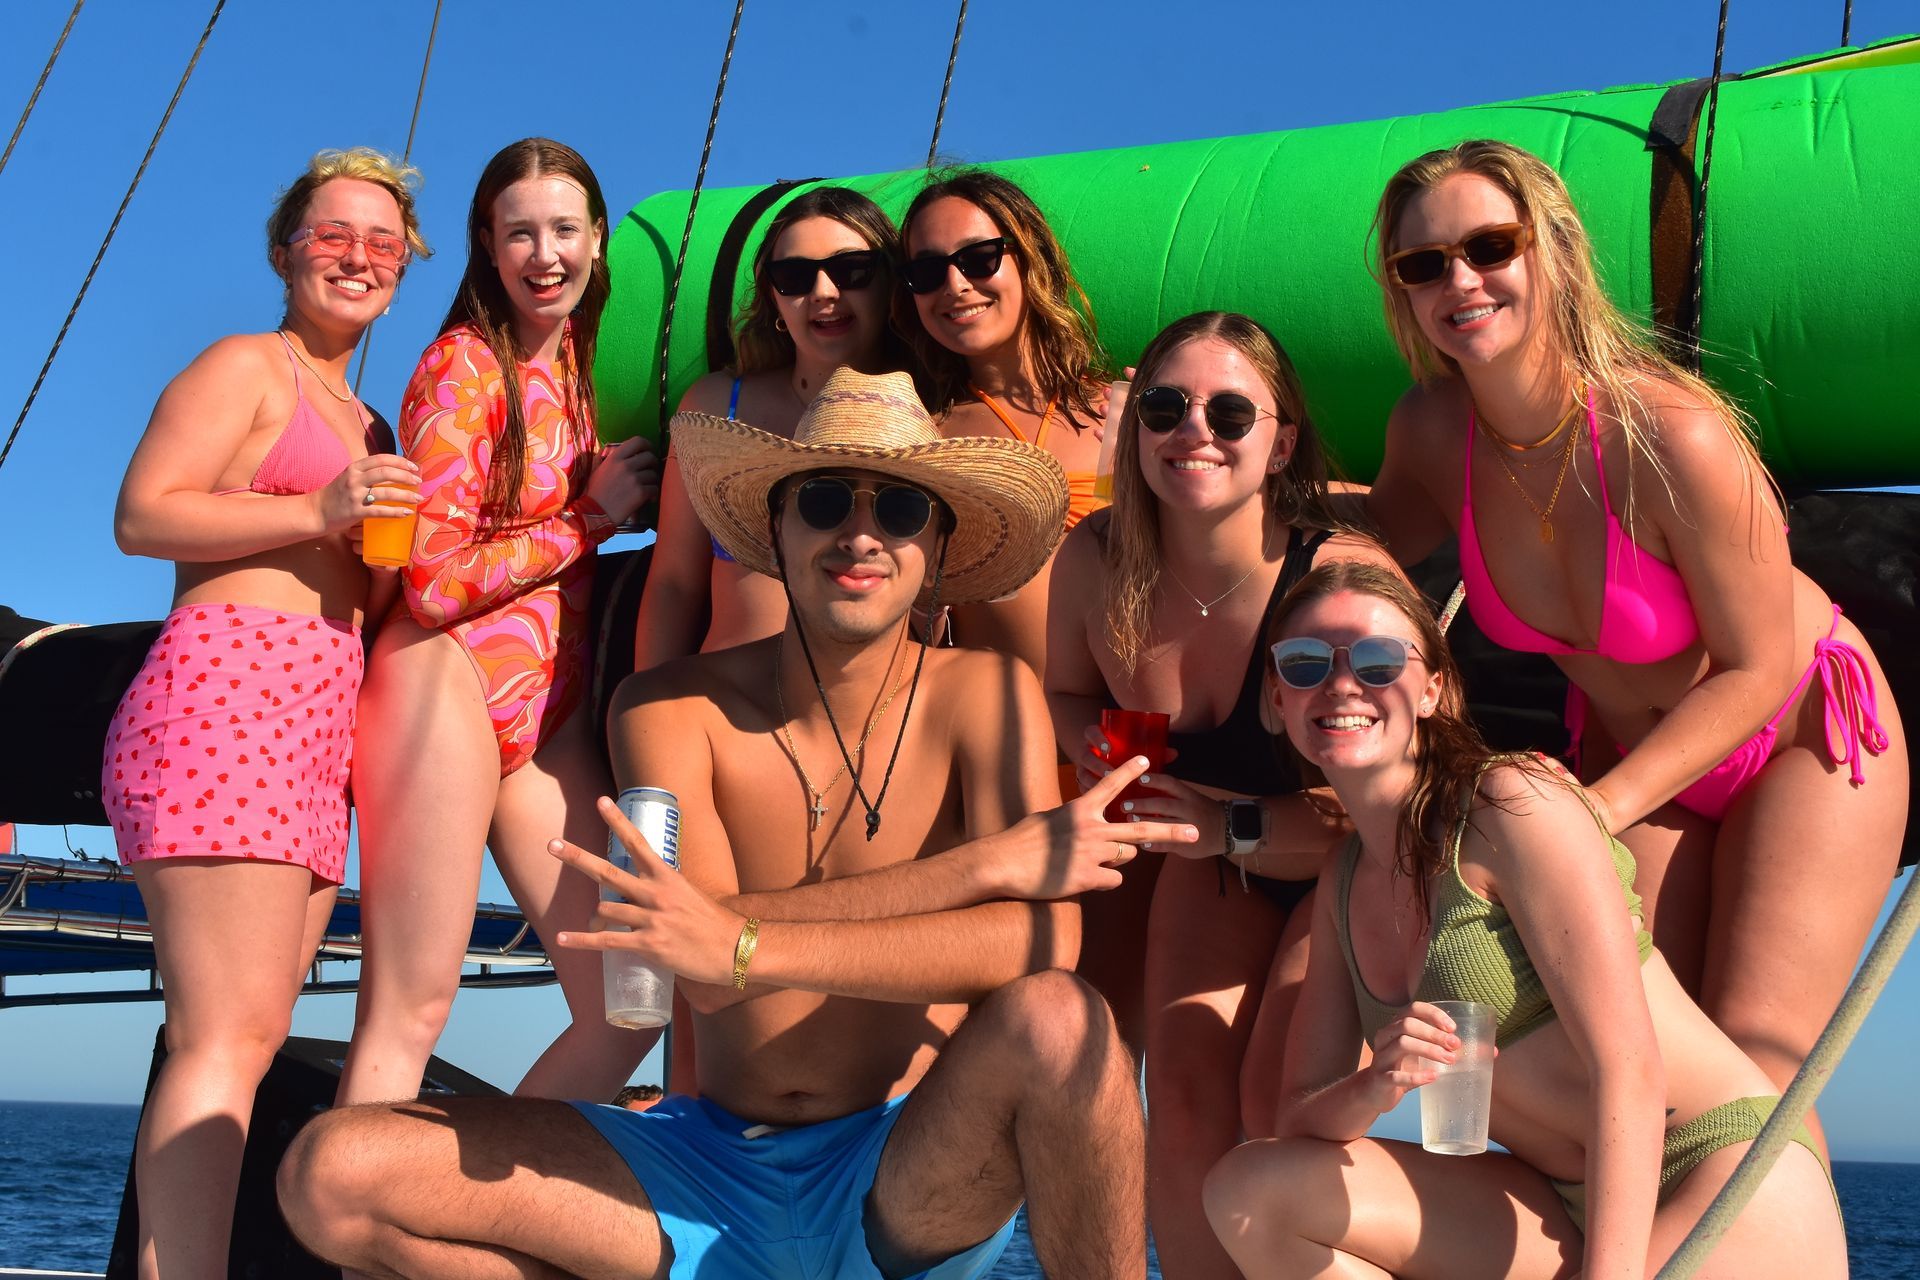 A group of people in bikinis are posing for a picture on a boat.